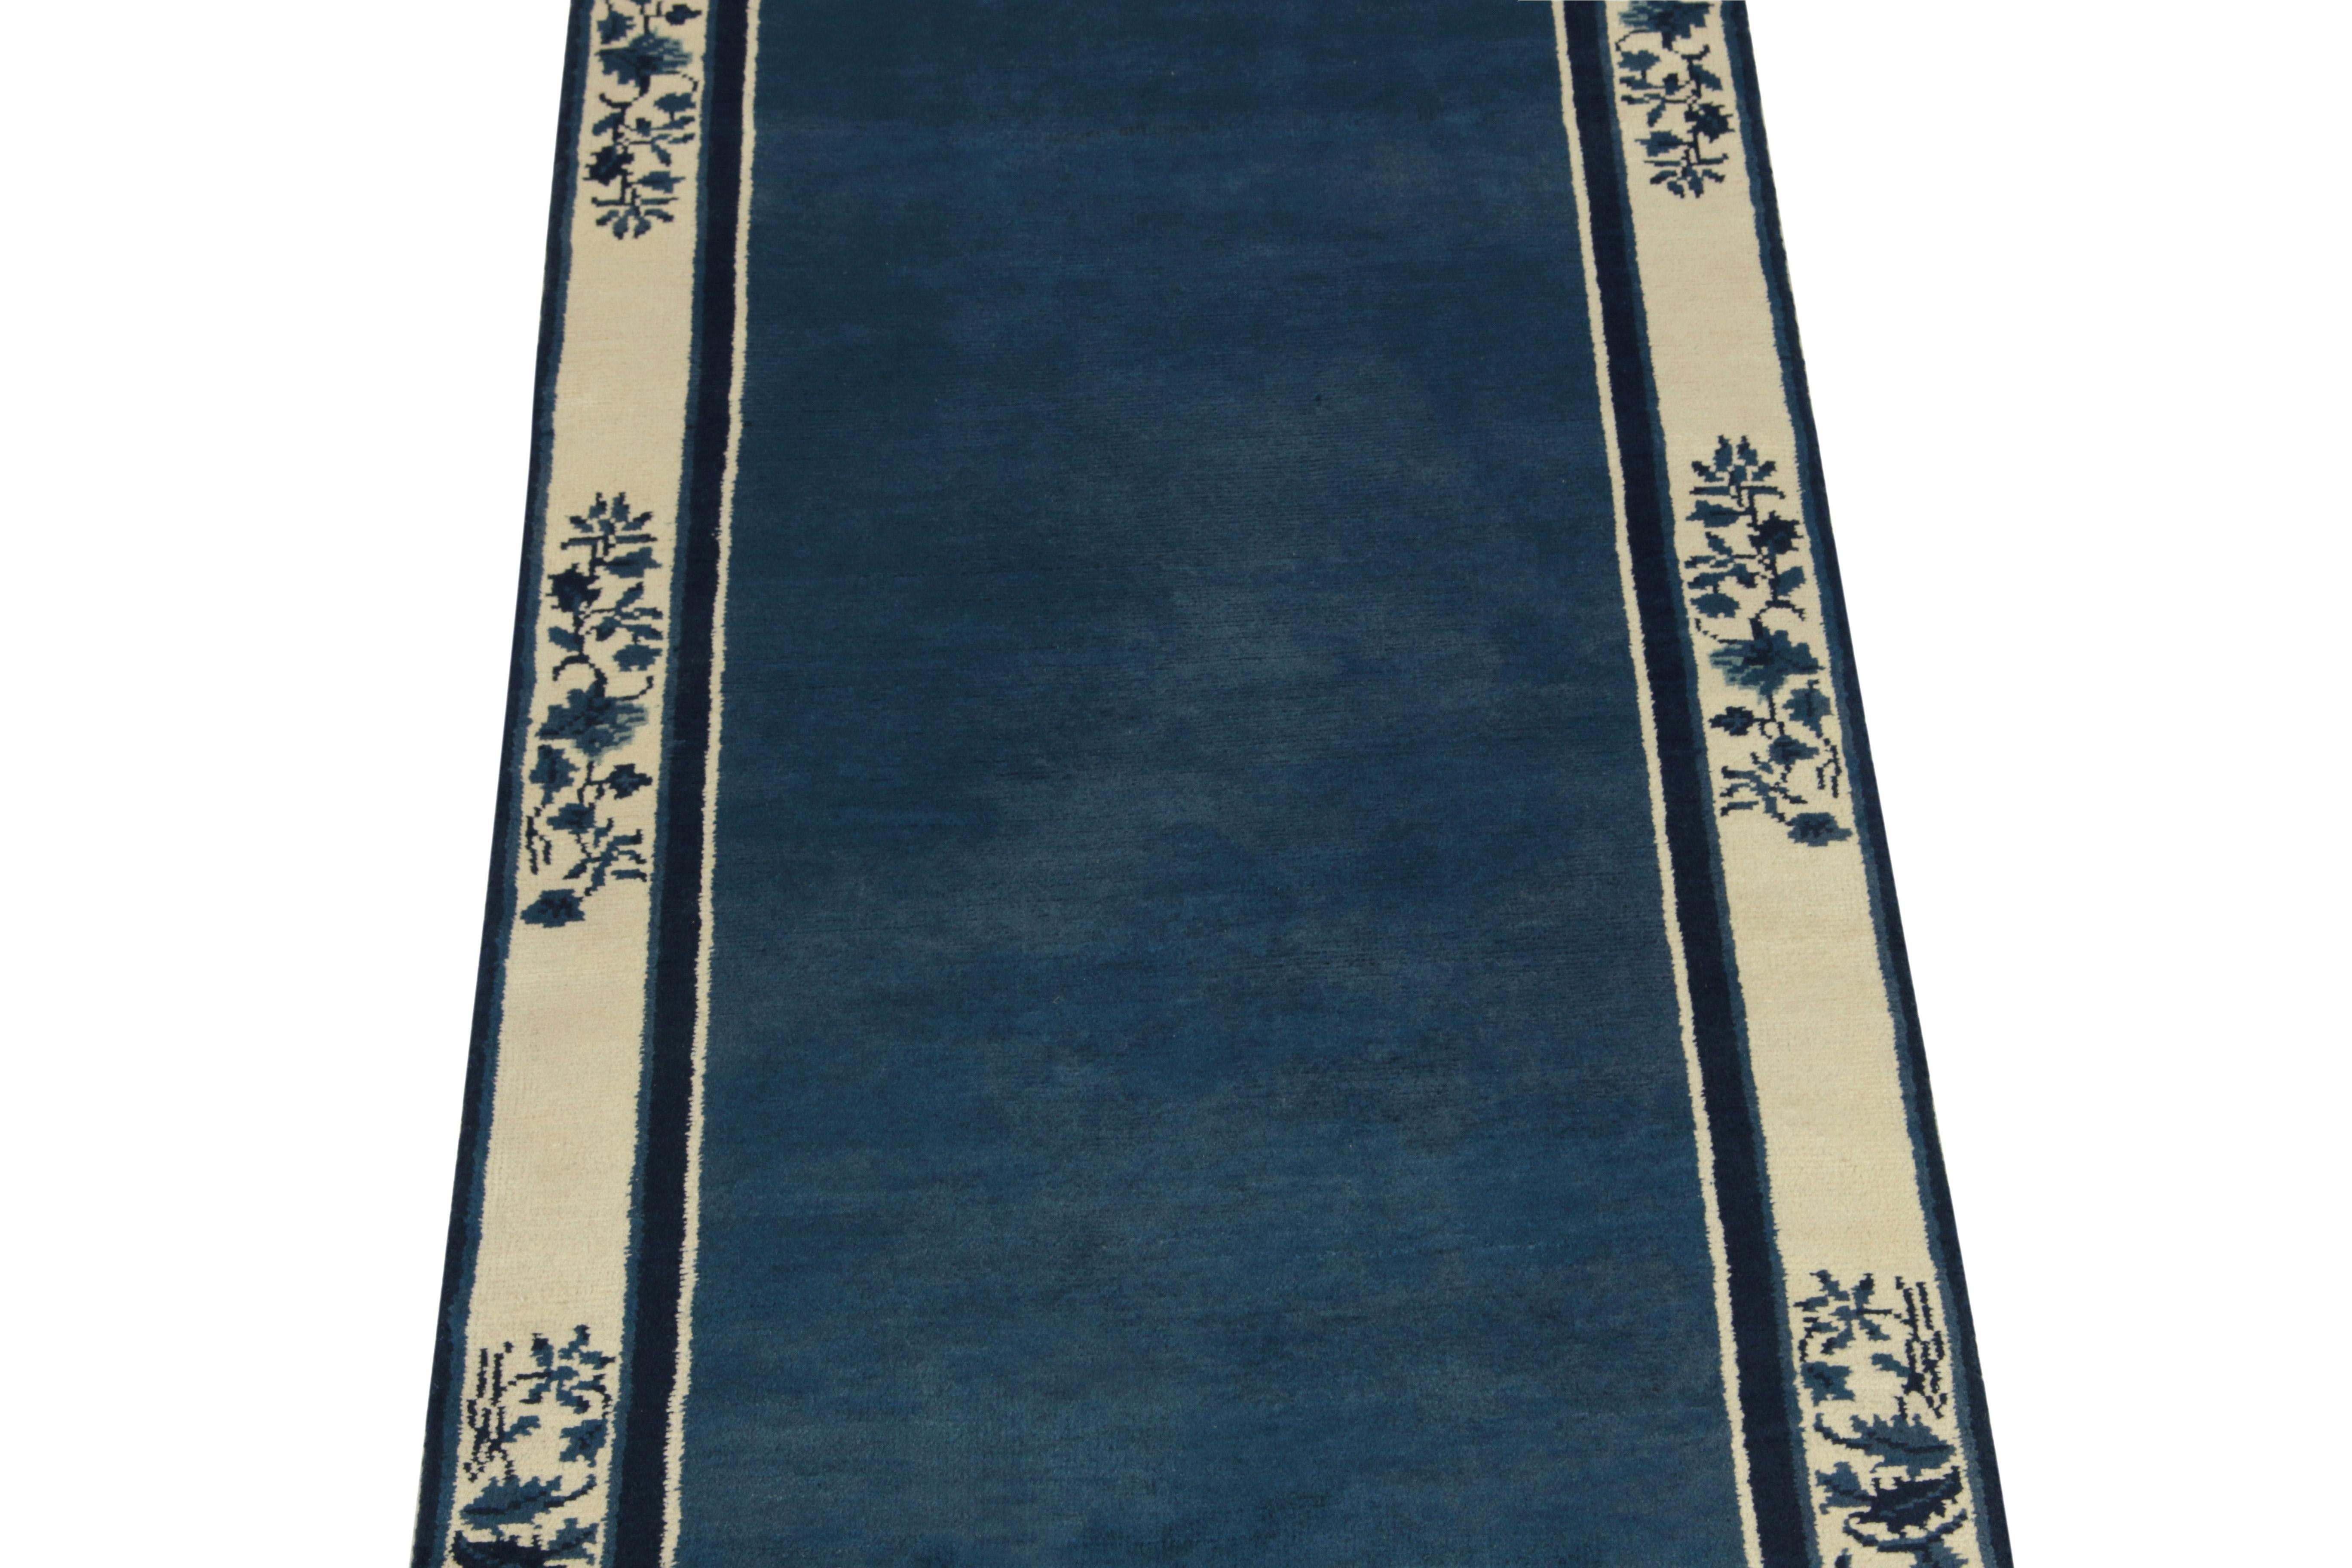 Indian Vintage Chinese Deco Style Runner in Deep Blue, off White Floral Pattern Border For Sale